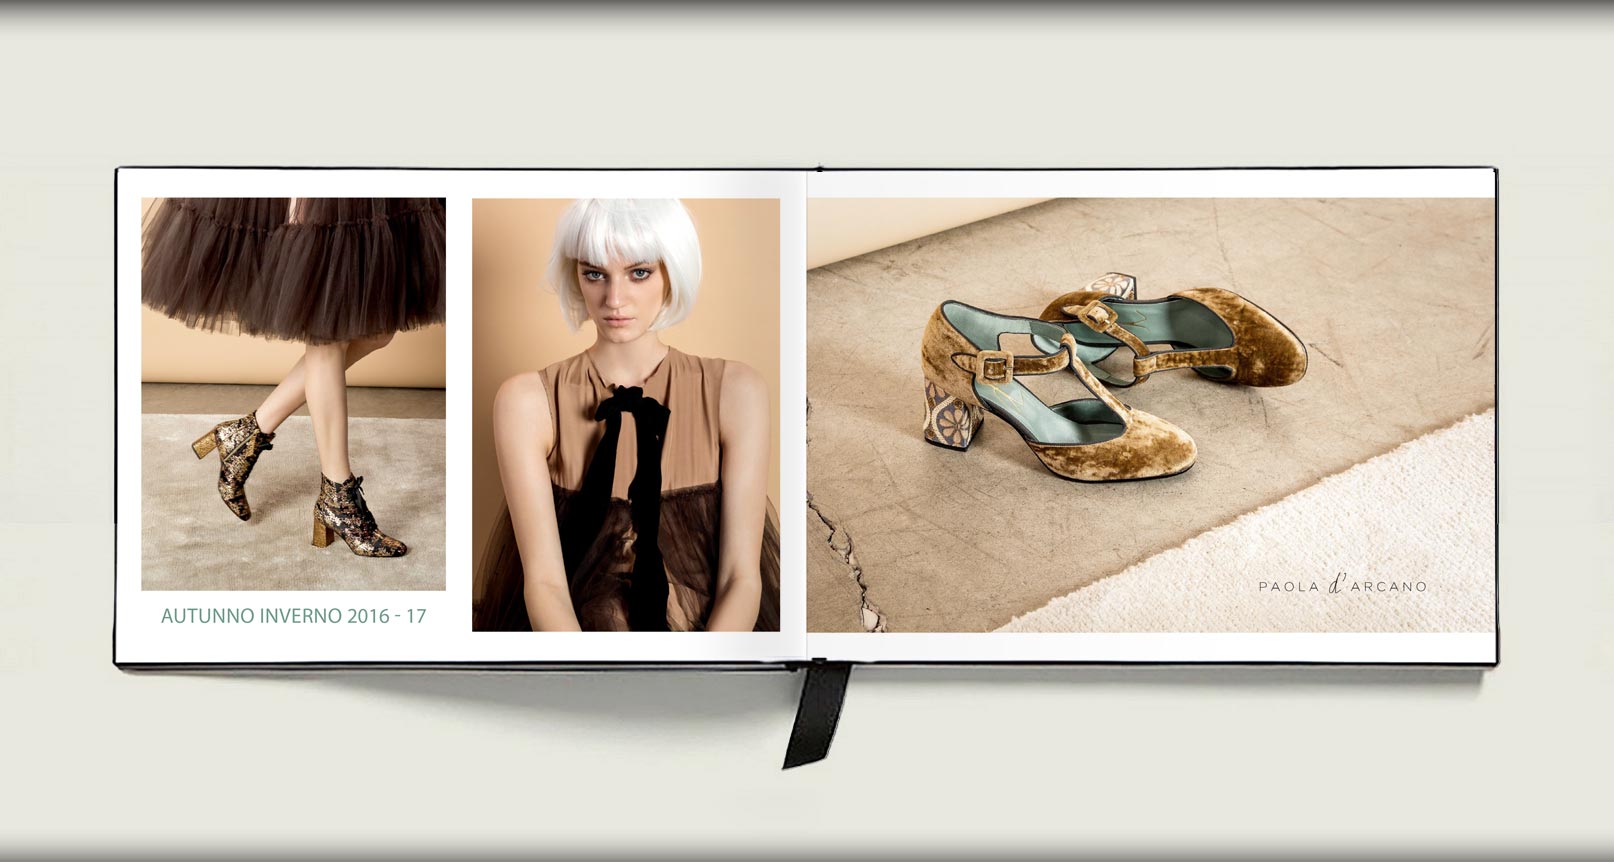 Story Paola D'Arcano Shoes Made in Italy - 11